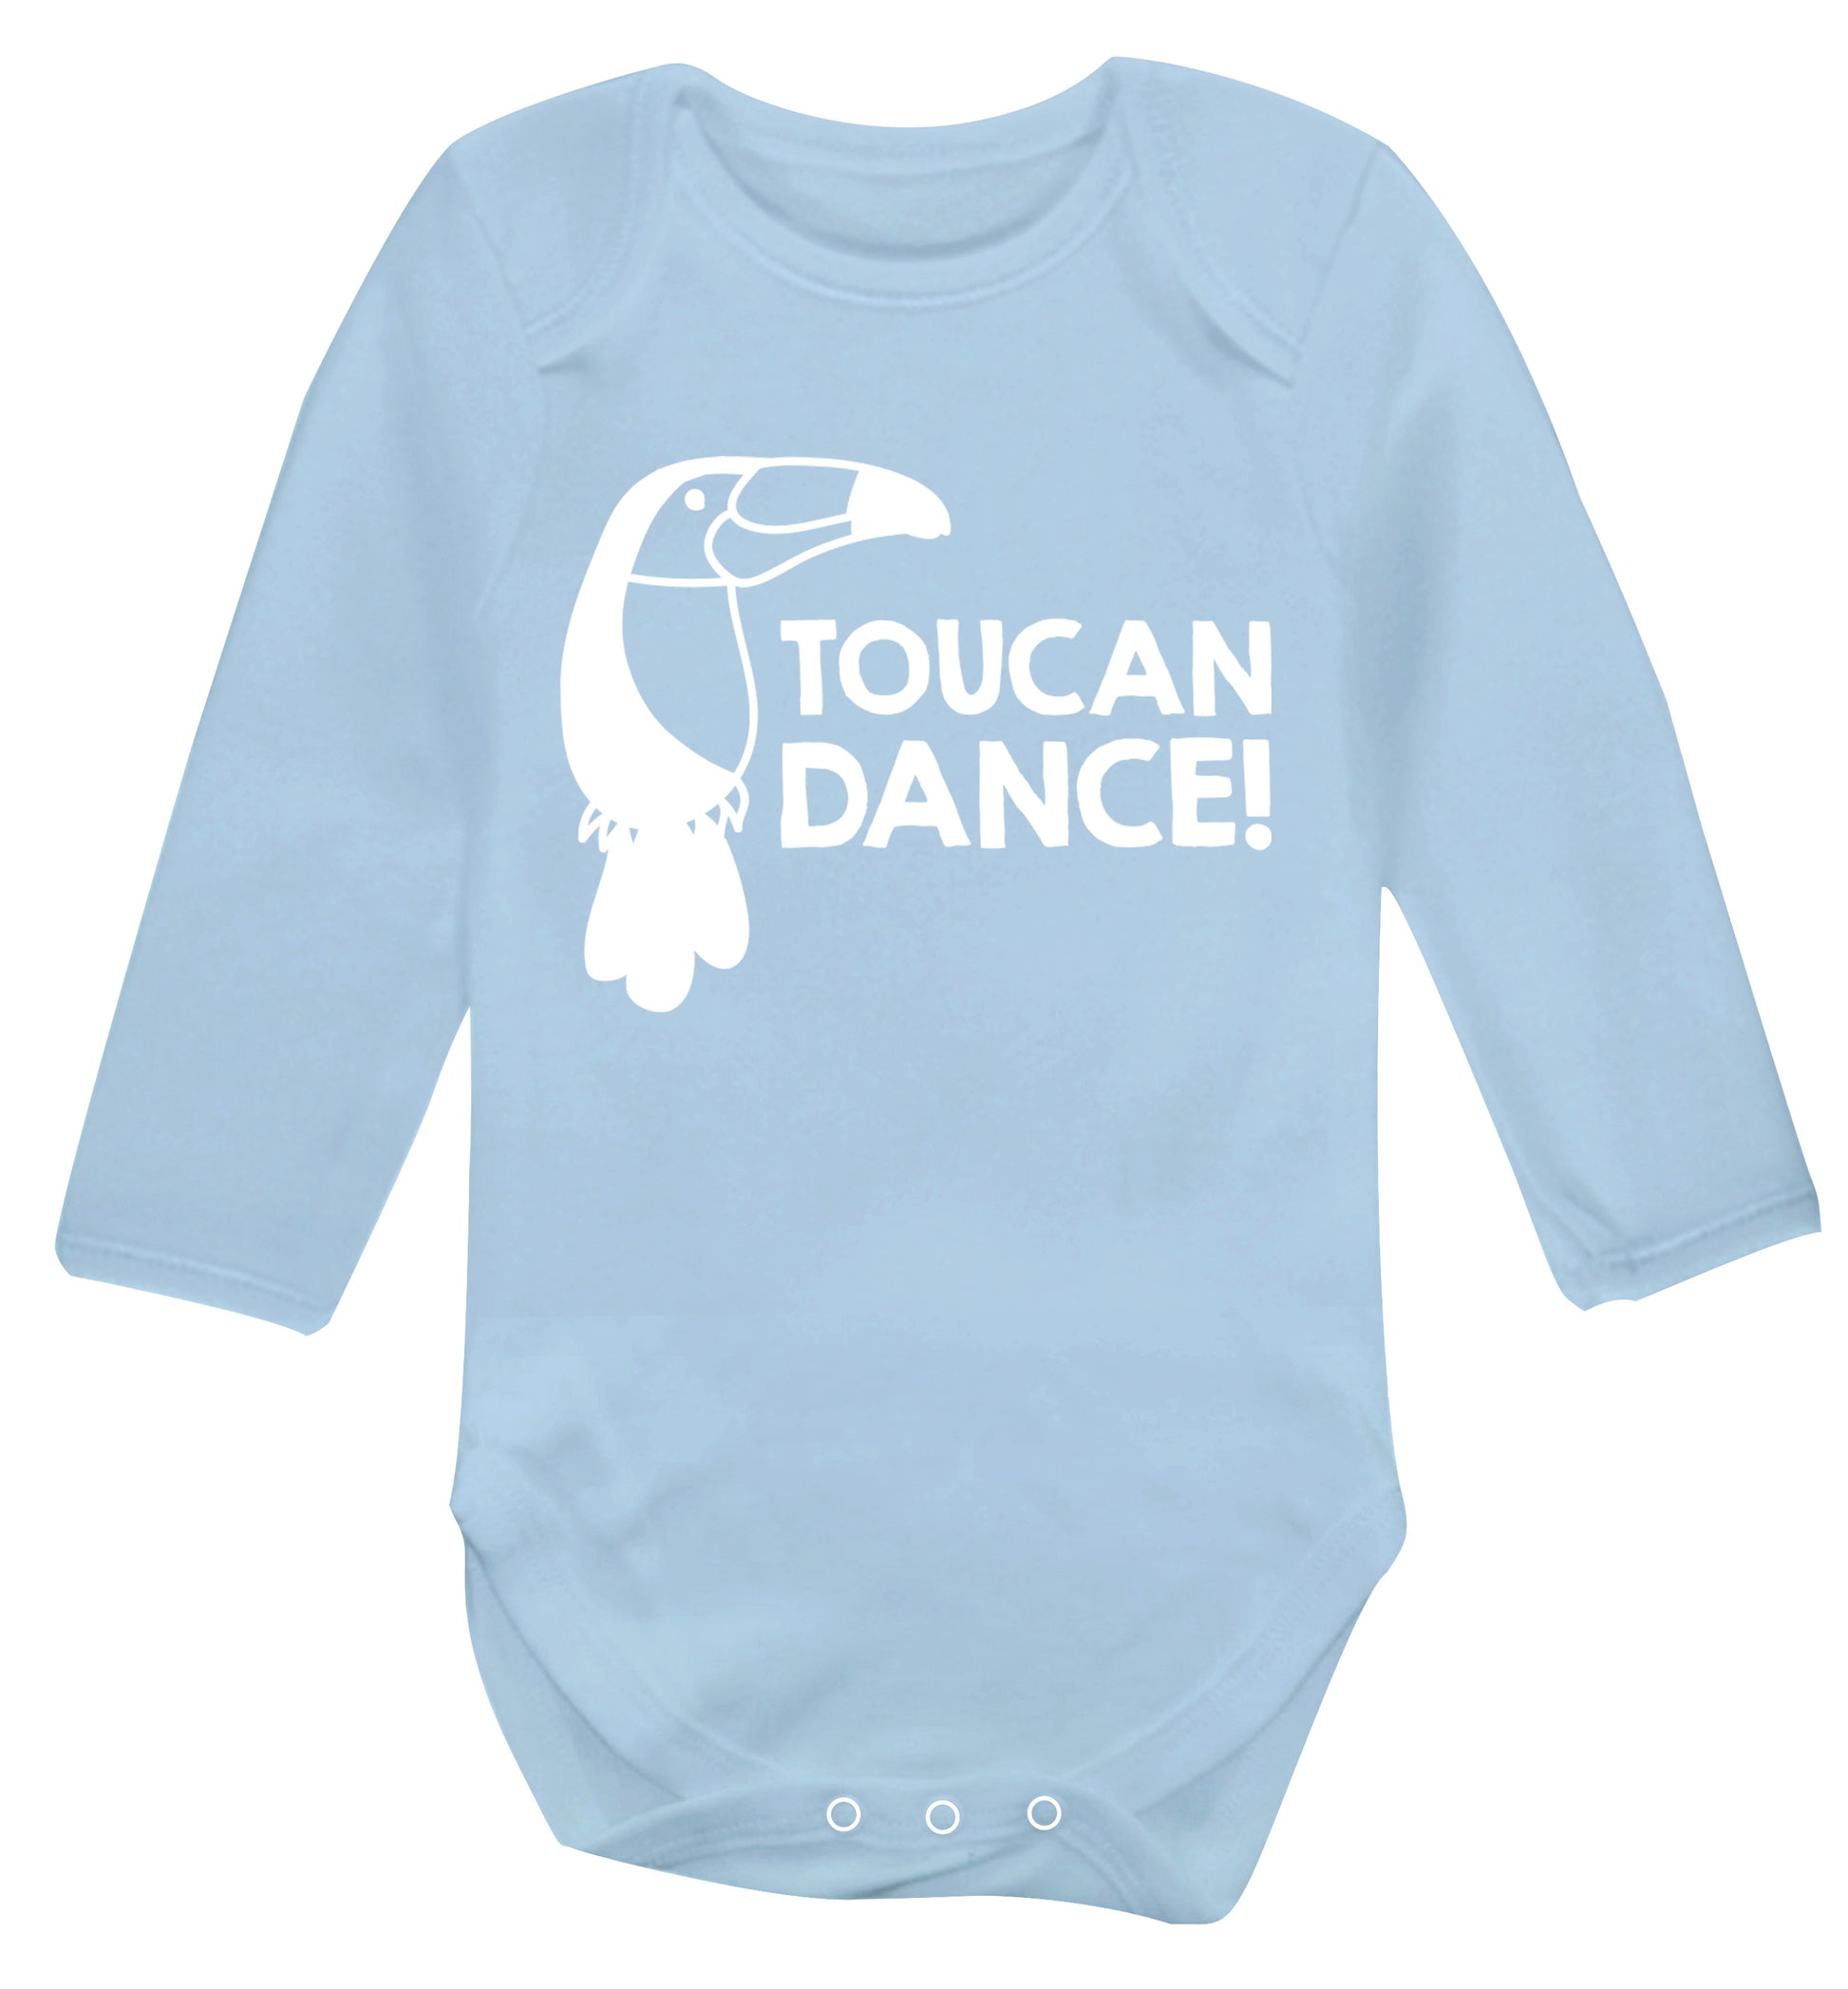 Toucan dance Baby Vest long sleeved pale blue 6-12 months